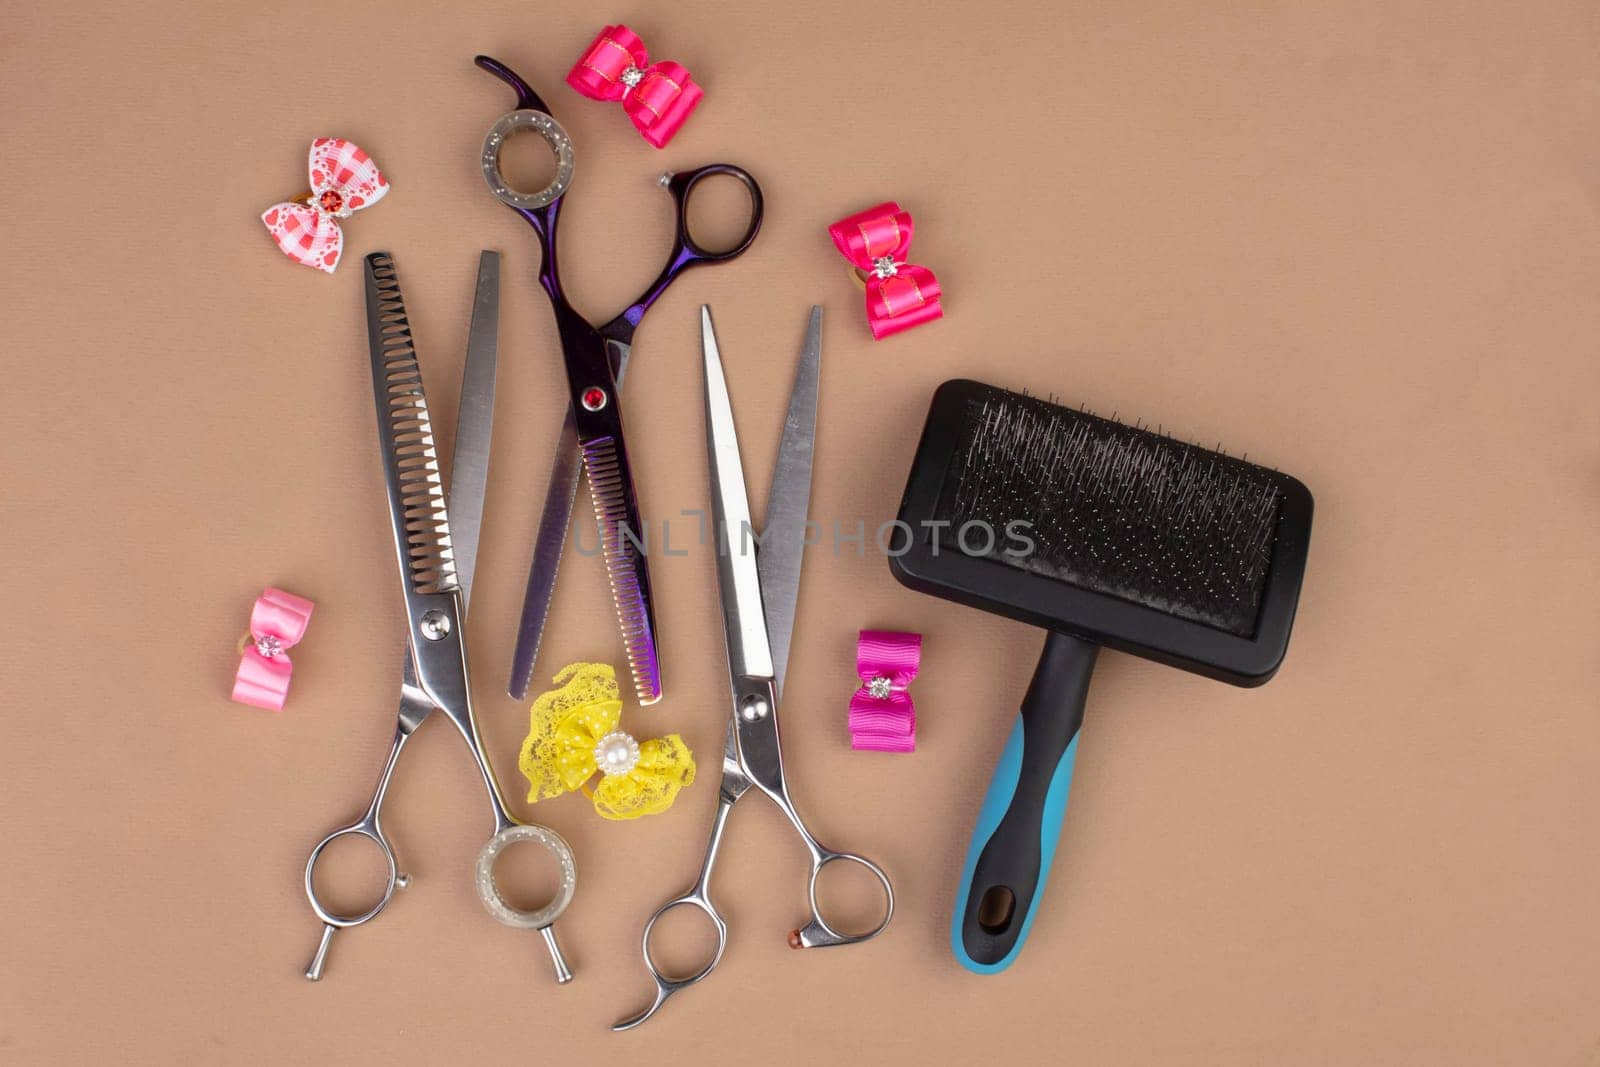 Tool for the groomer on a beige background. Dog grooming accessories. Combs and brushes for animals. View from above